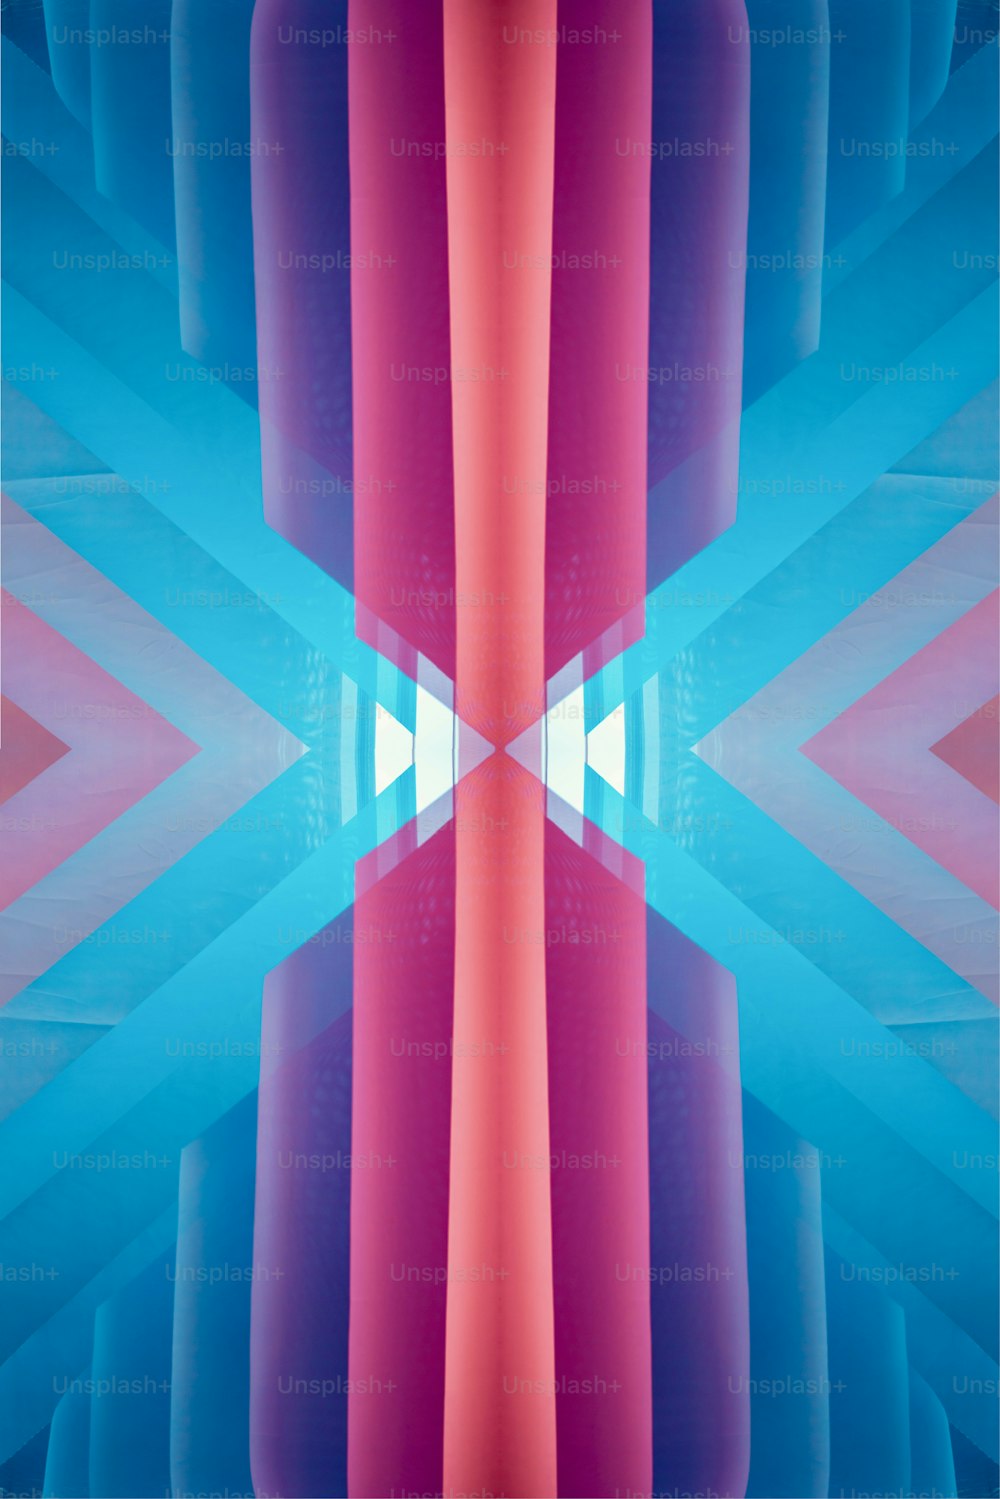 an abstract image of a blue and pink background